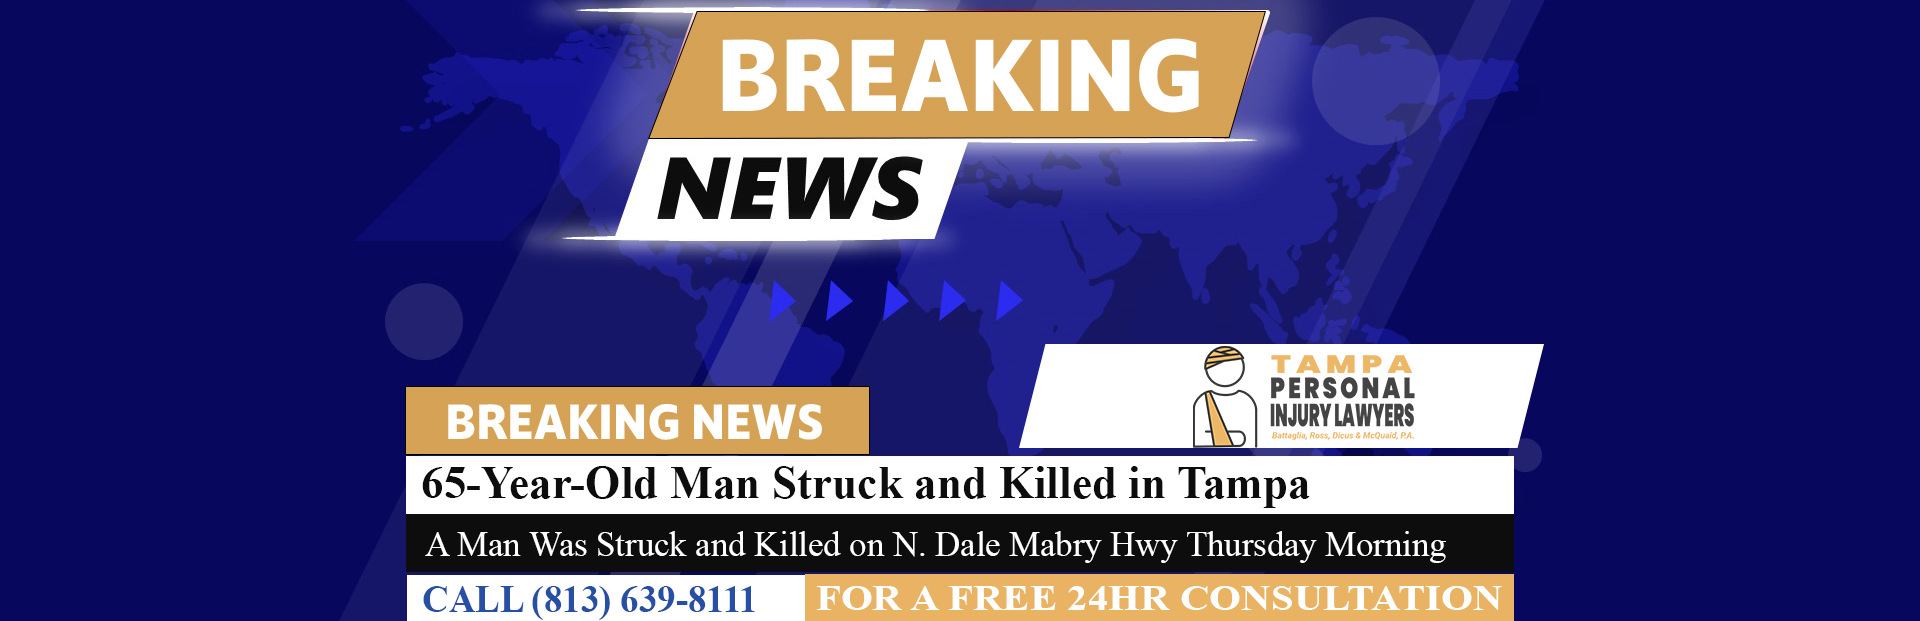 [06-24-23] 65-Year-Old Man Struck and Killed on Dale Mabry Hwy in Tampa Thursday